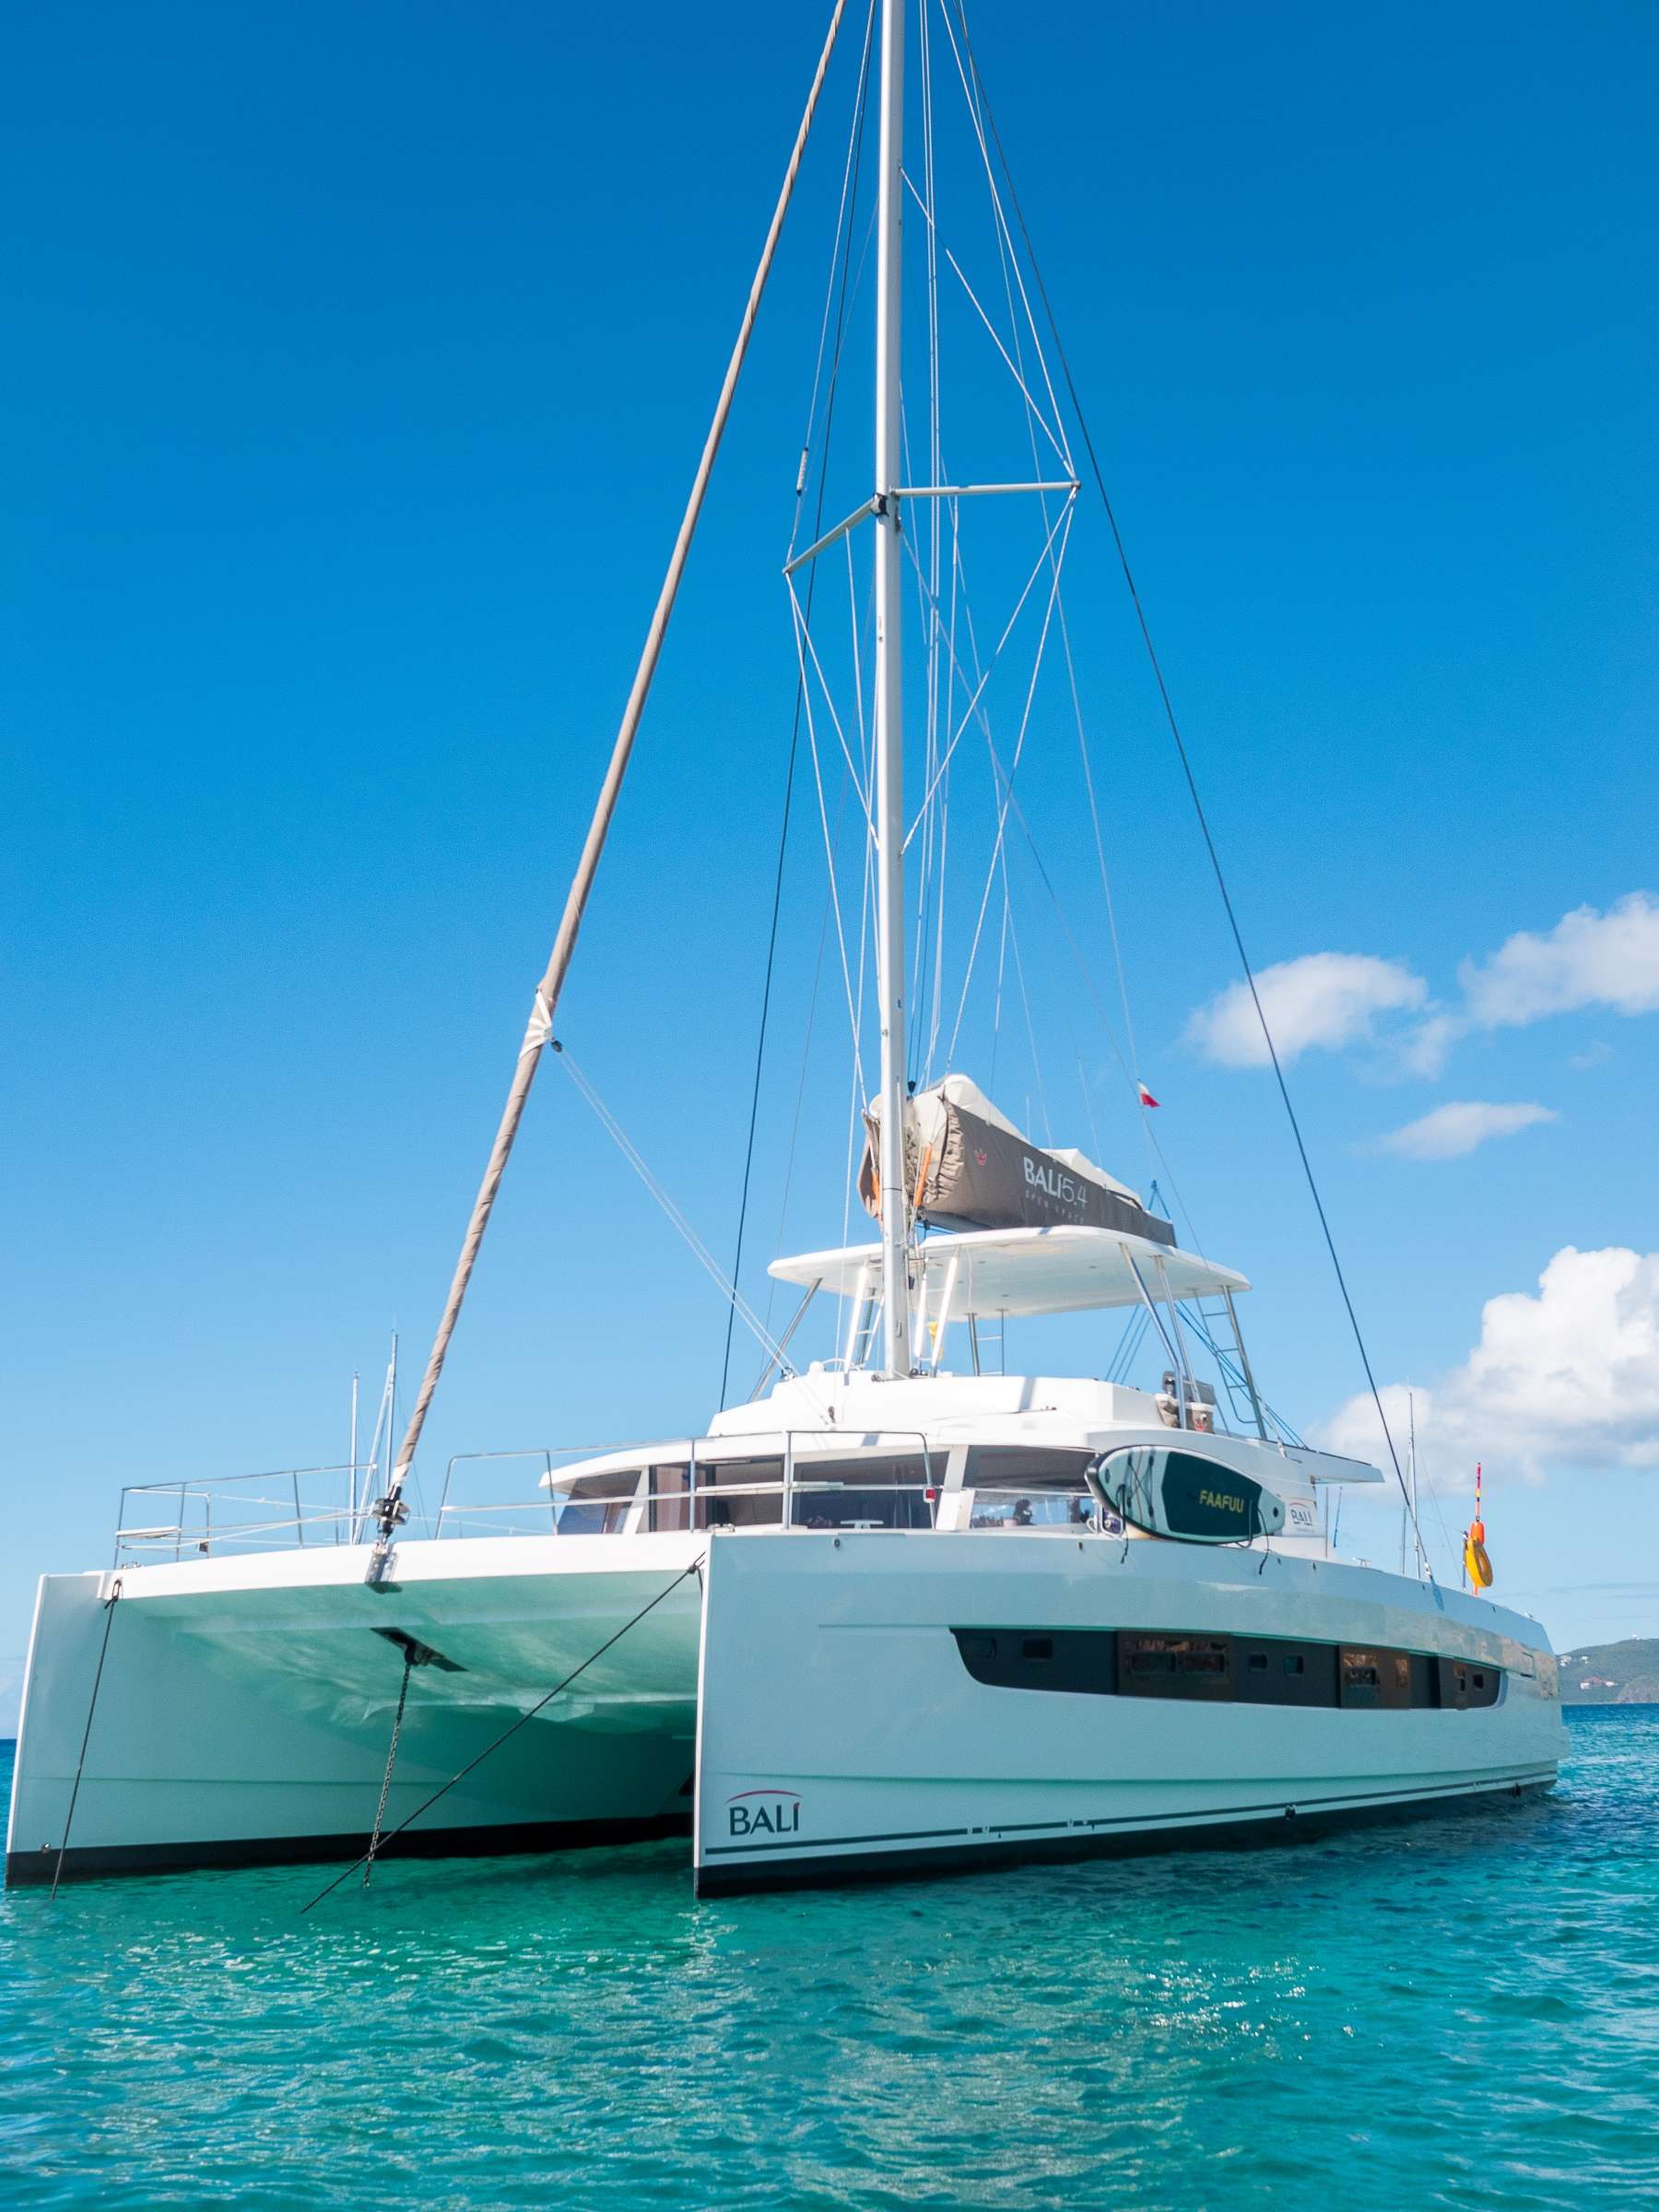 LEGASEA - Yacht Charter Saint Vincent and the Grenadines & Boat hire in Caribbean 1